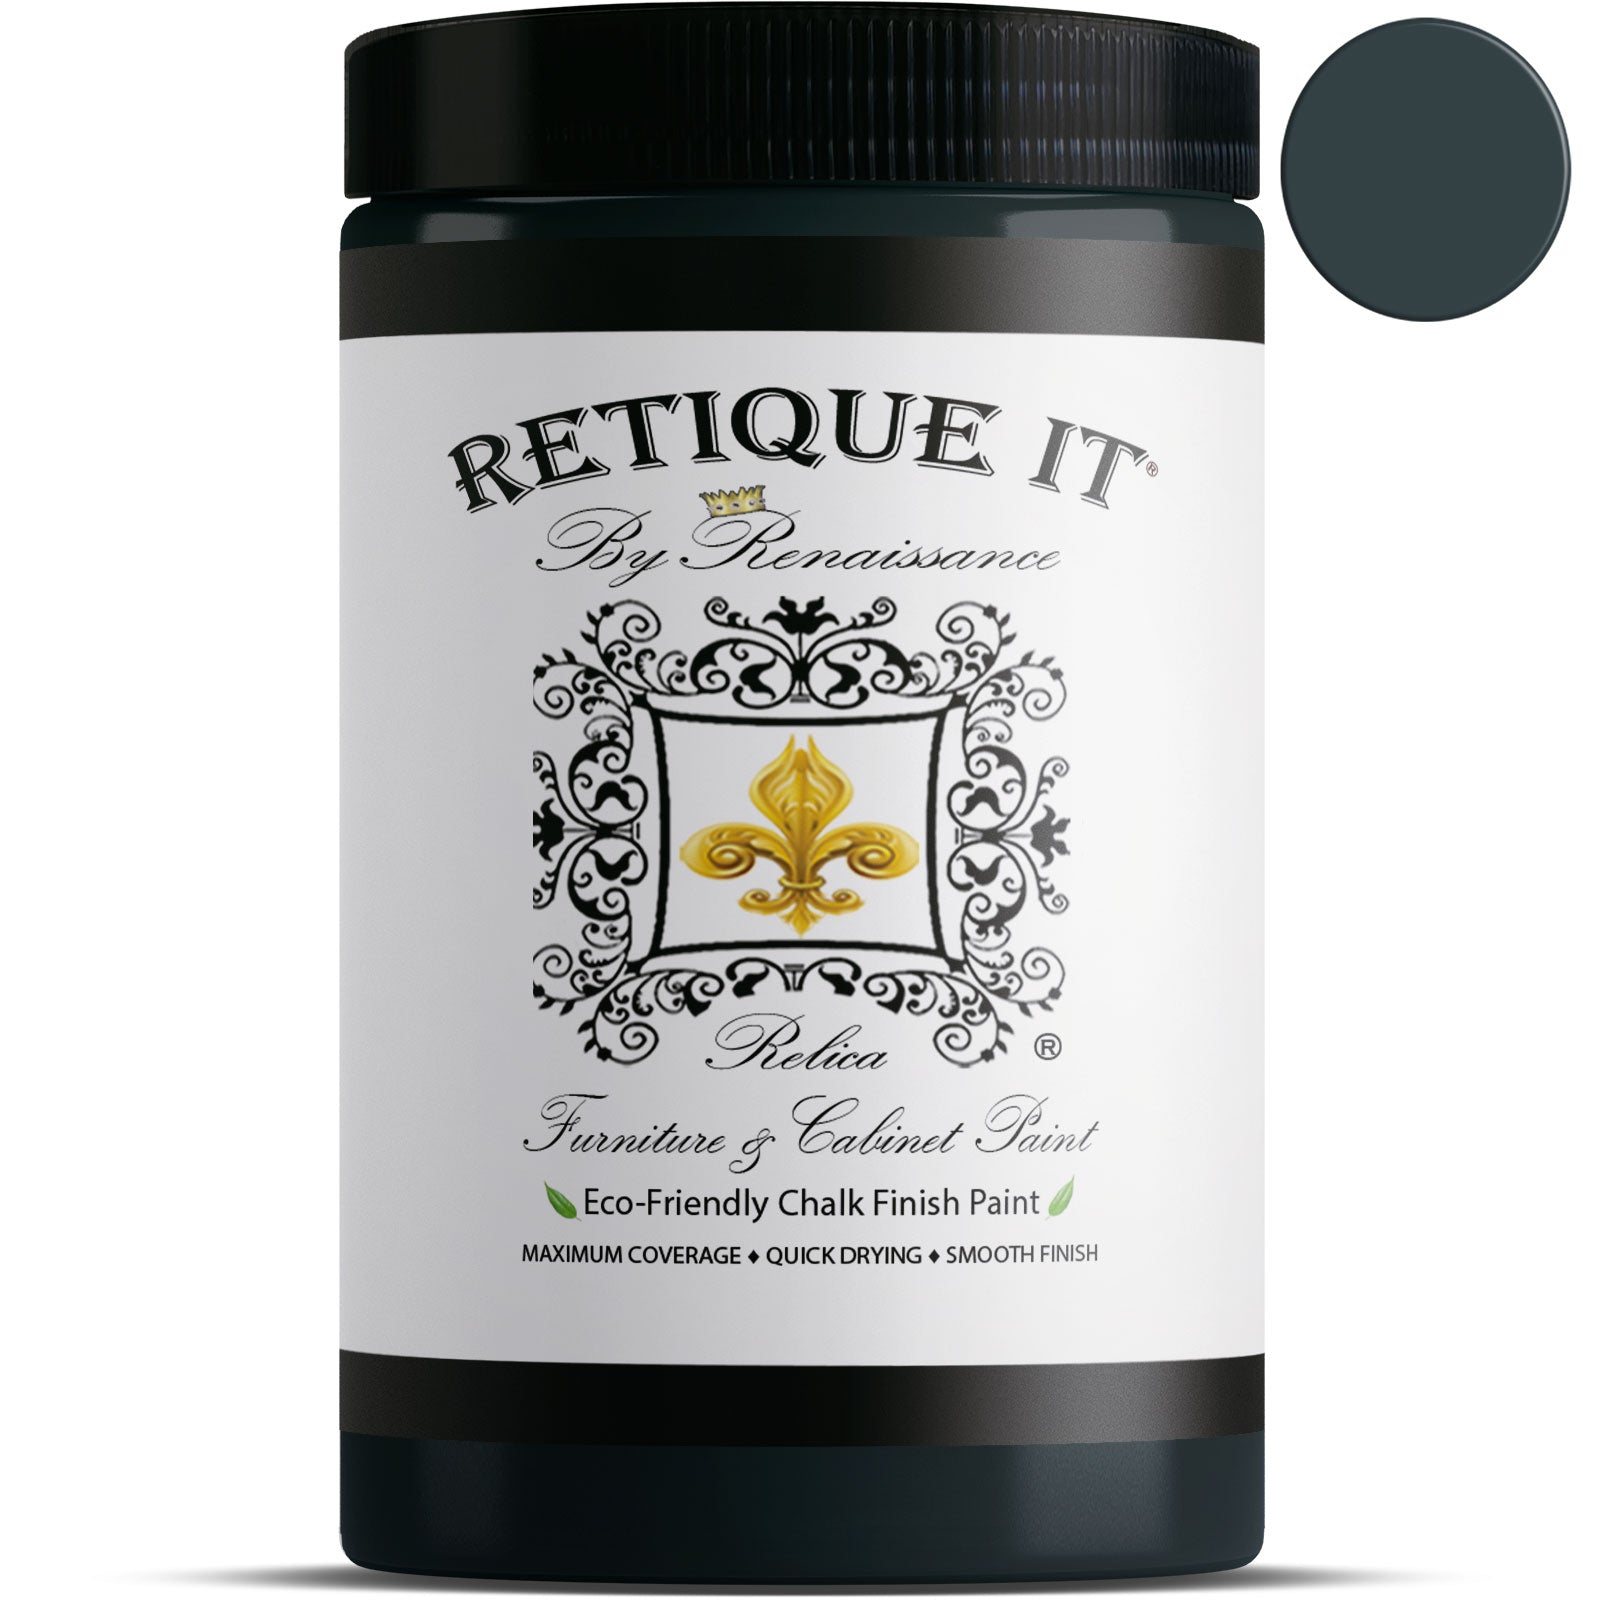 Retique It All-In-One Chalk Based Paint Ultratique for Furniture & Cabinets, 32 oz (Quart), 07 Midnight Black, 32 fl oz